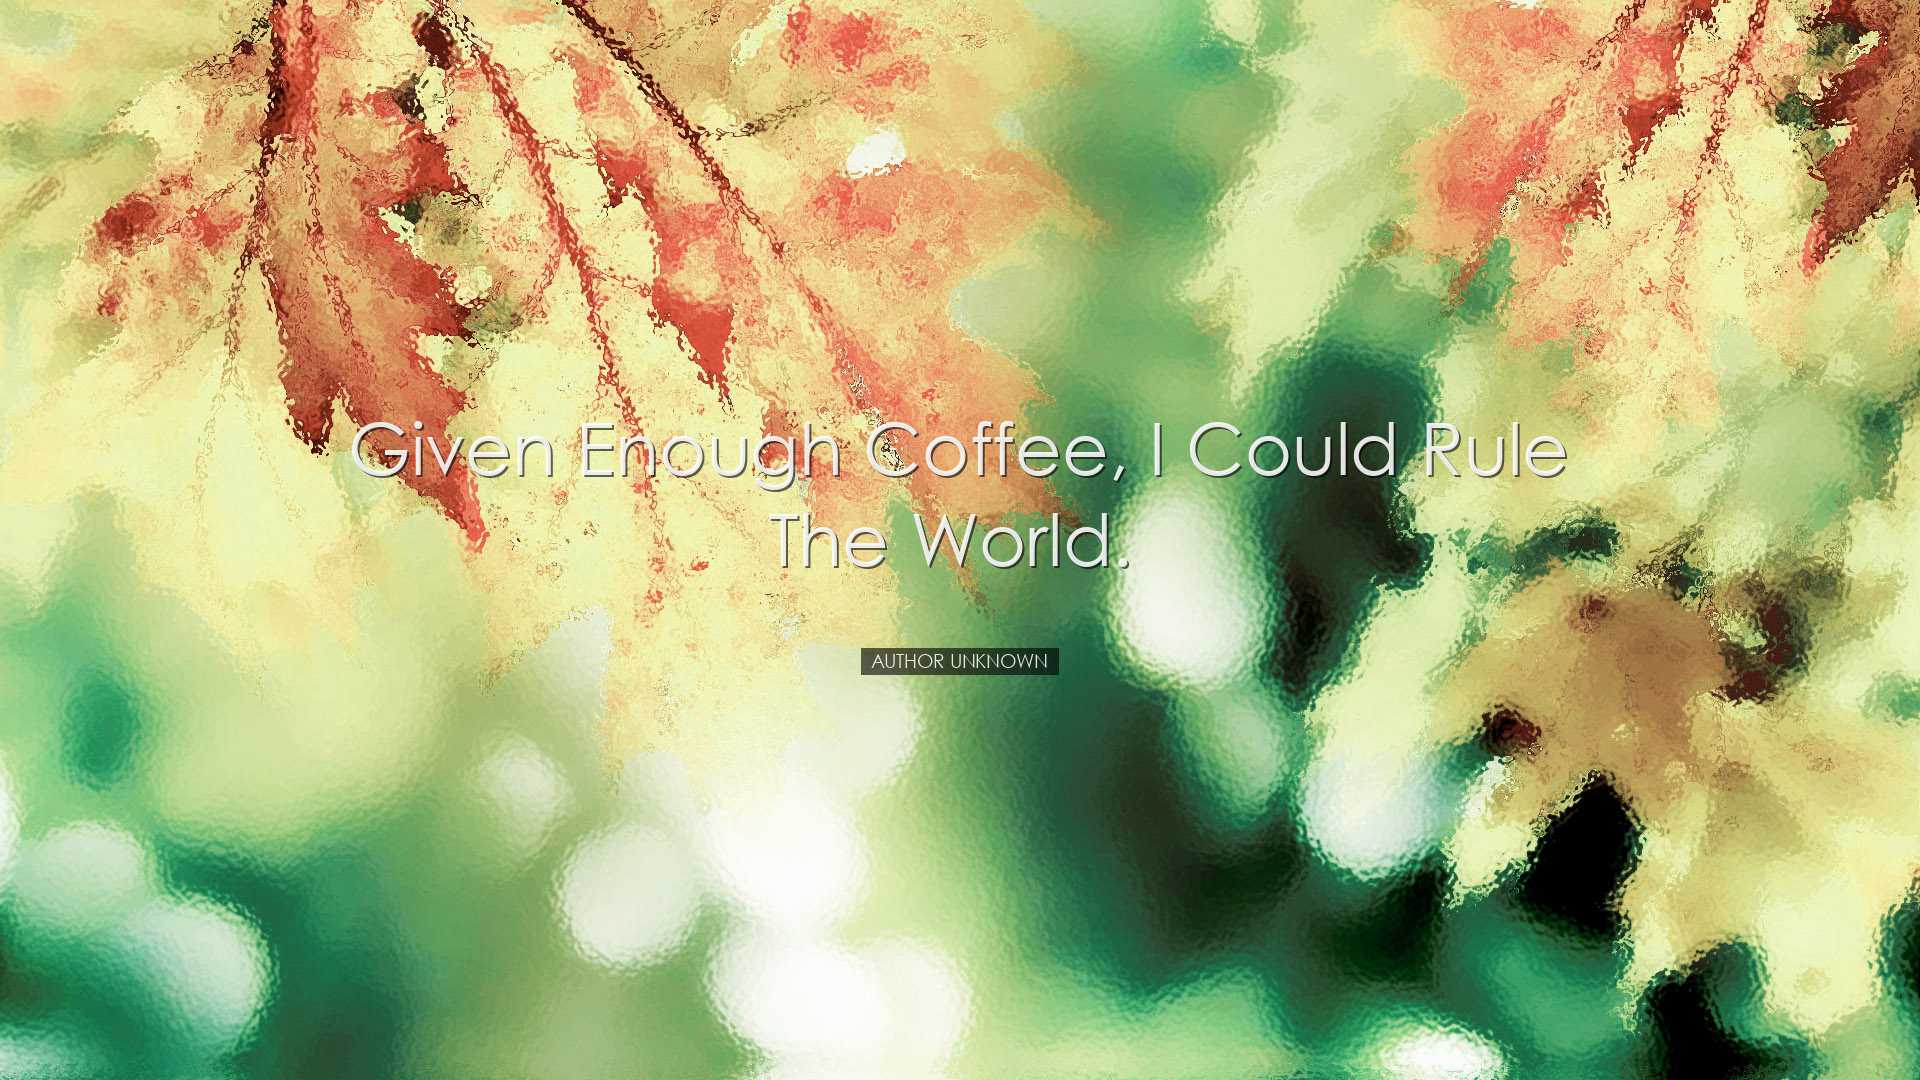 Given enough coffee, I could rule the world.  - Author Unknown